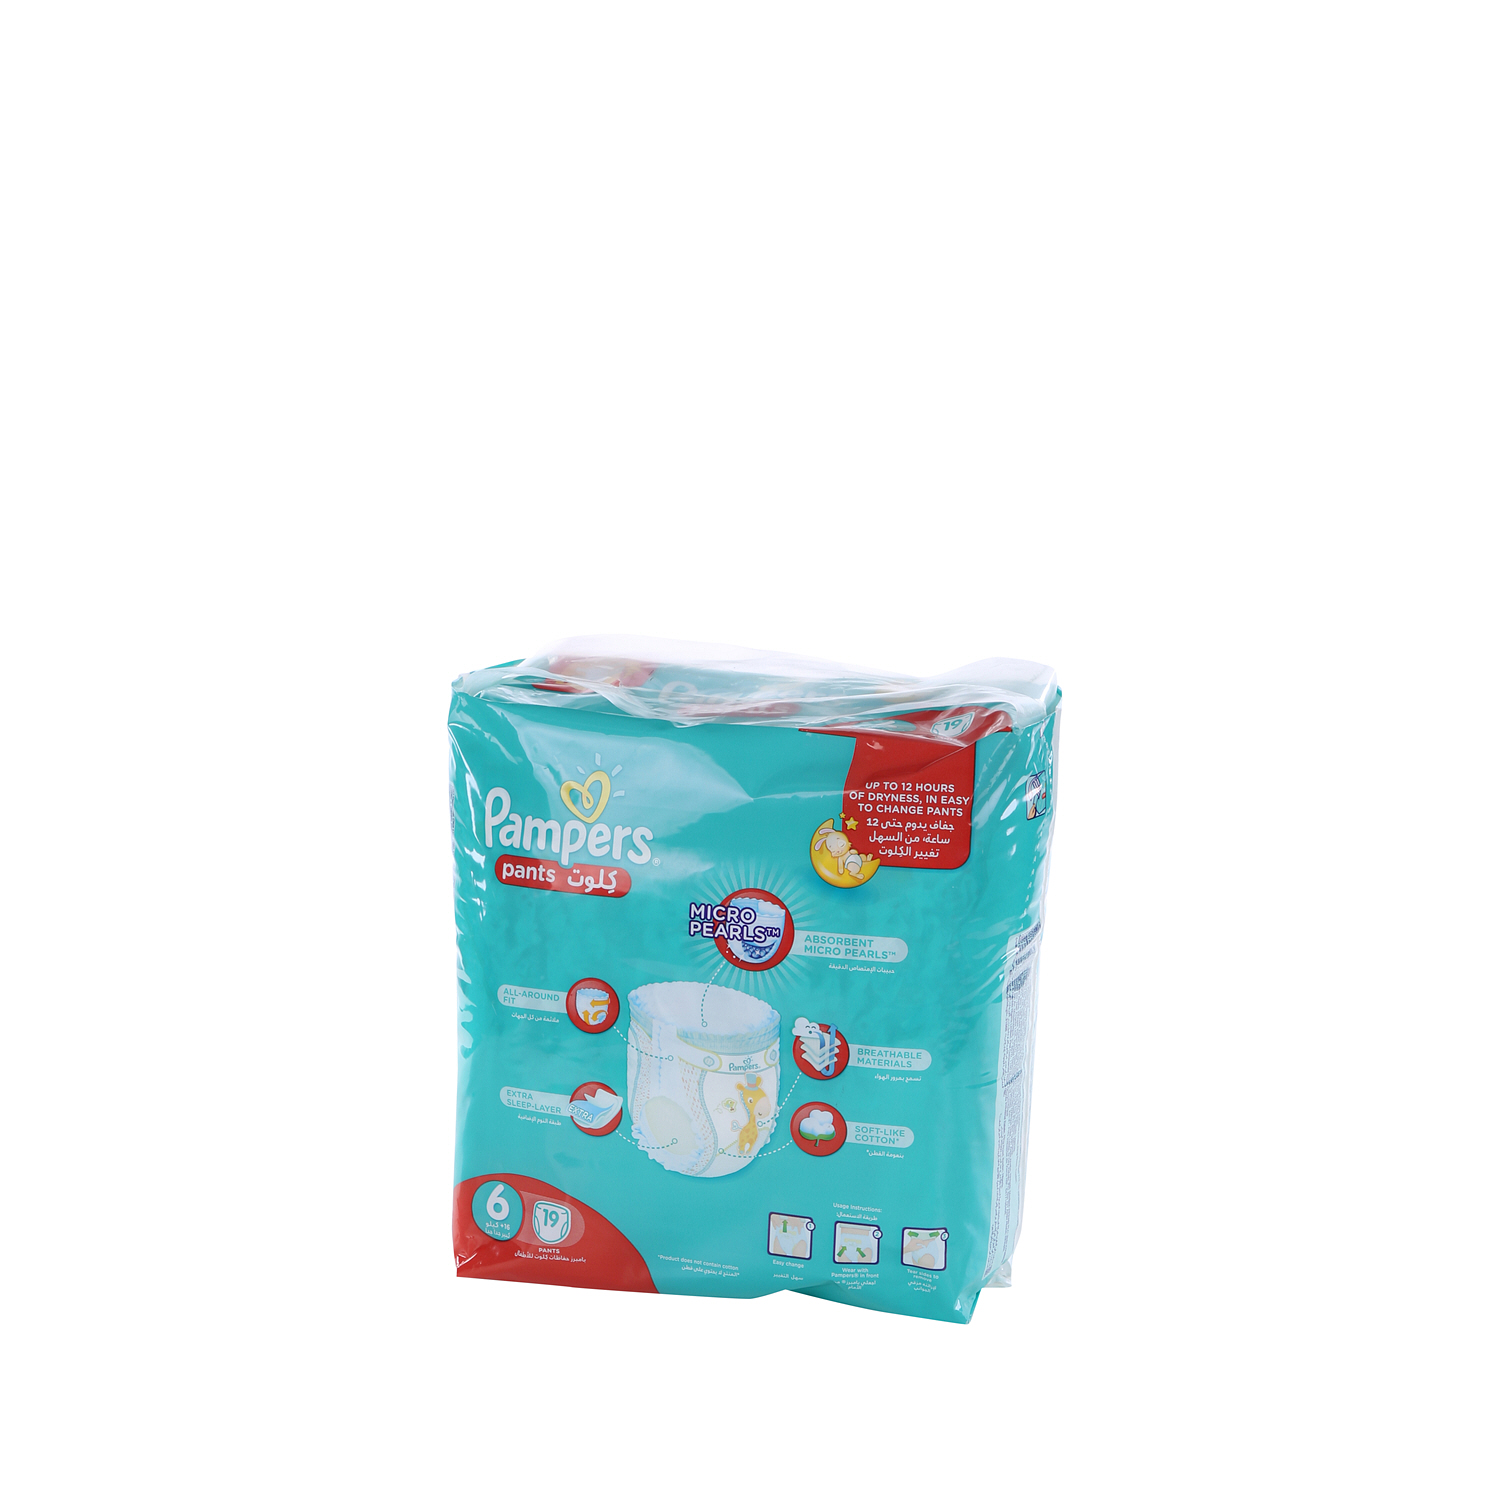 Pampers Pants Size 6 19 Pieces